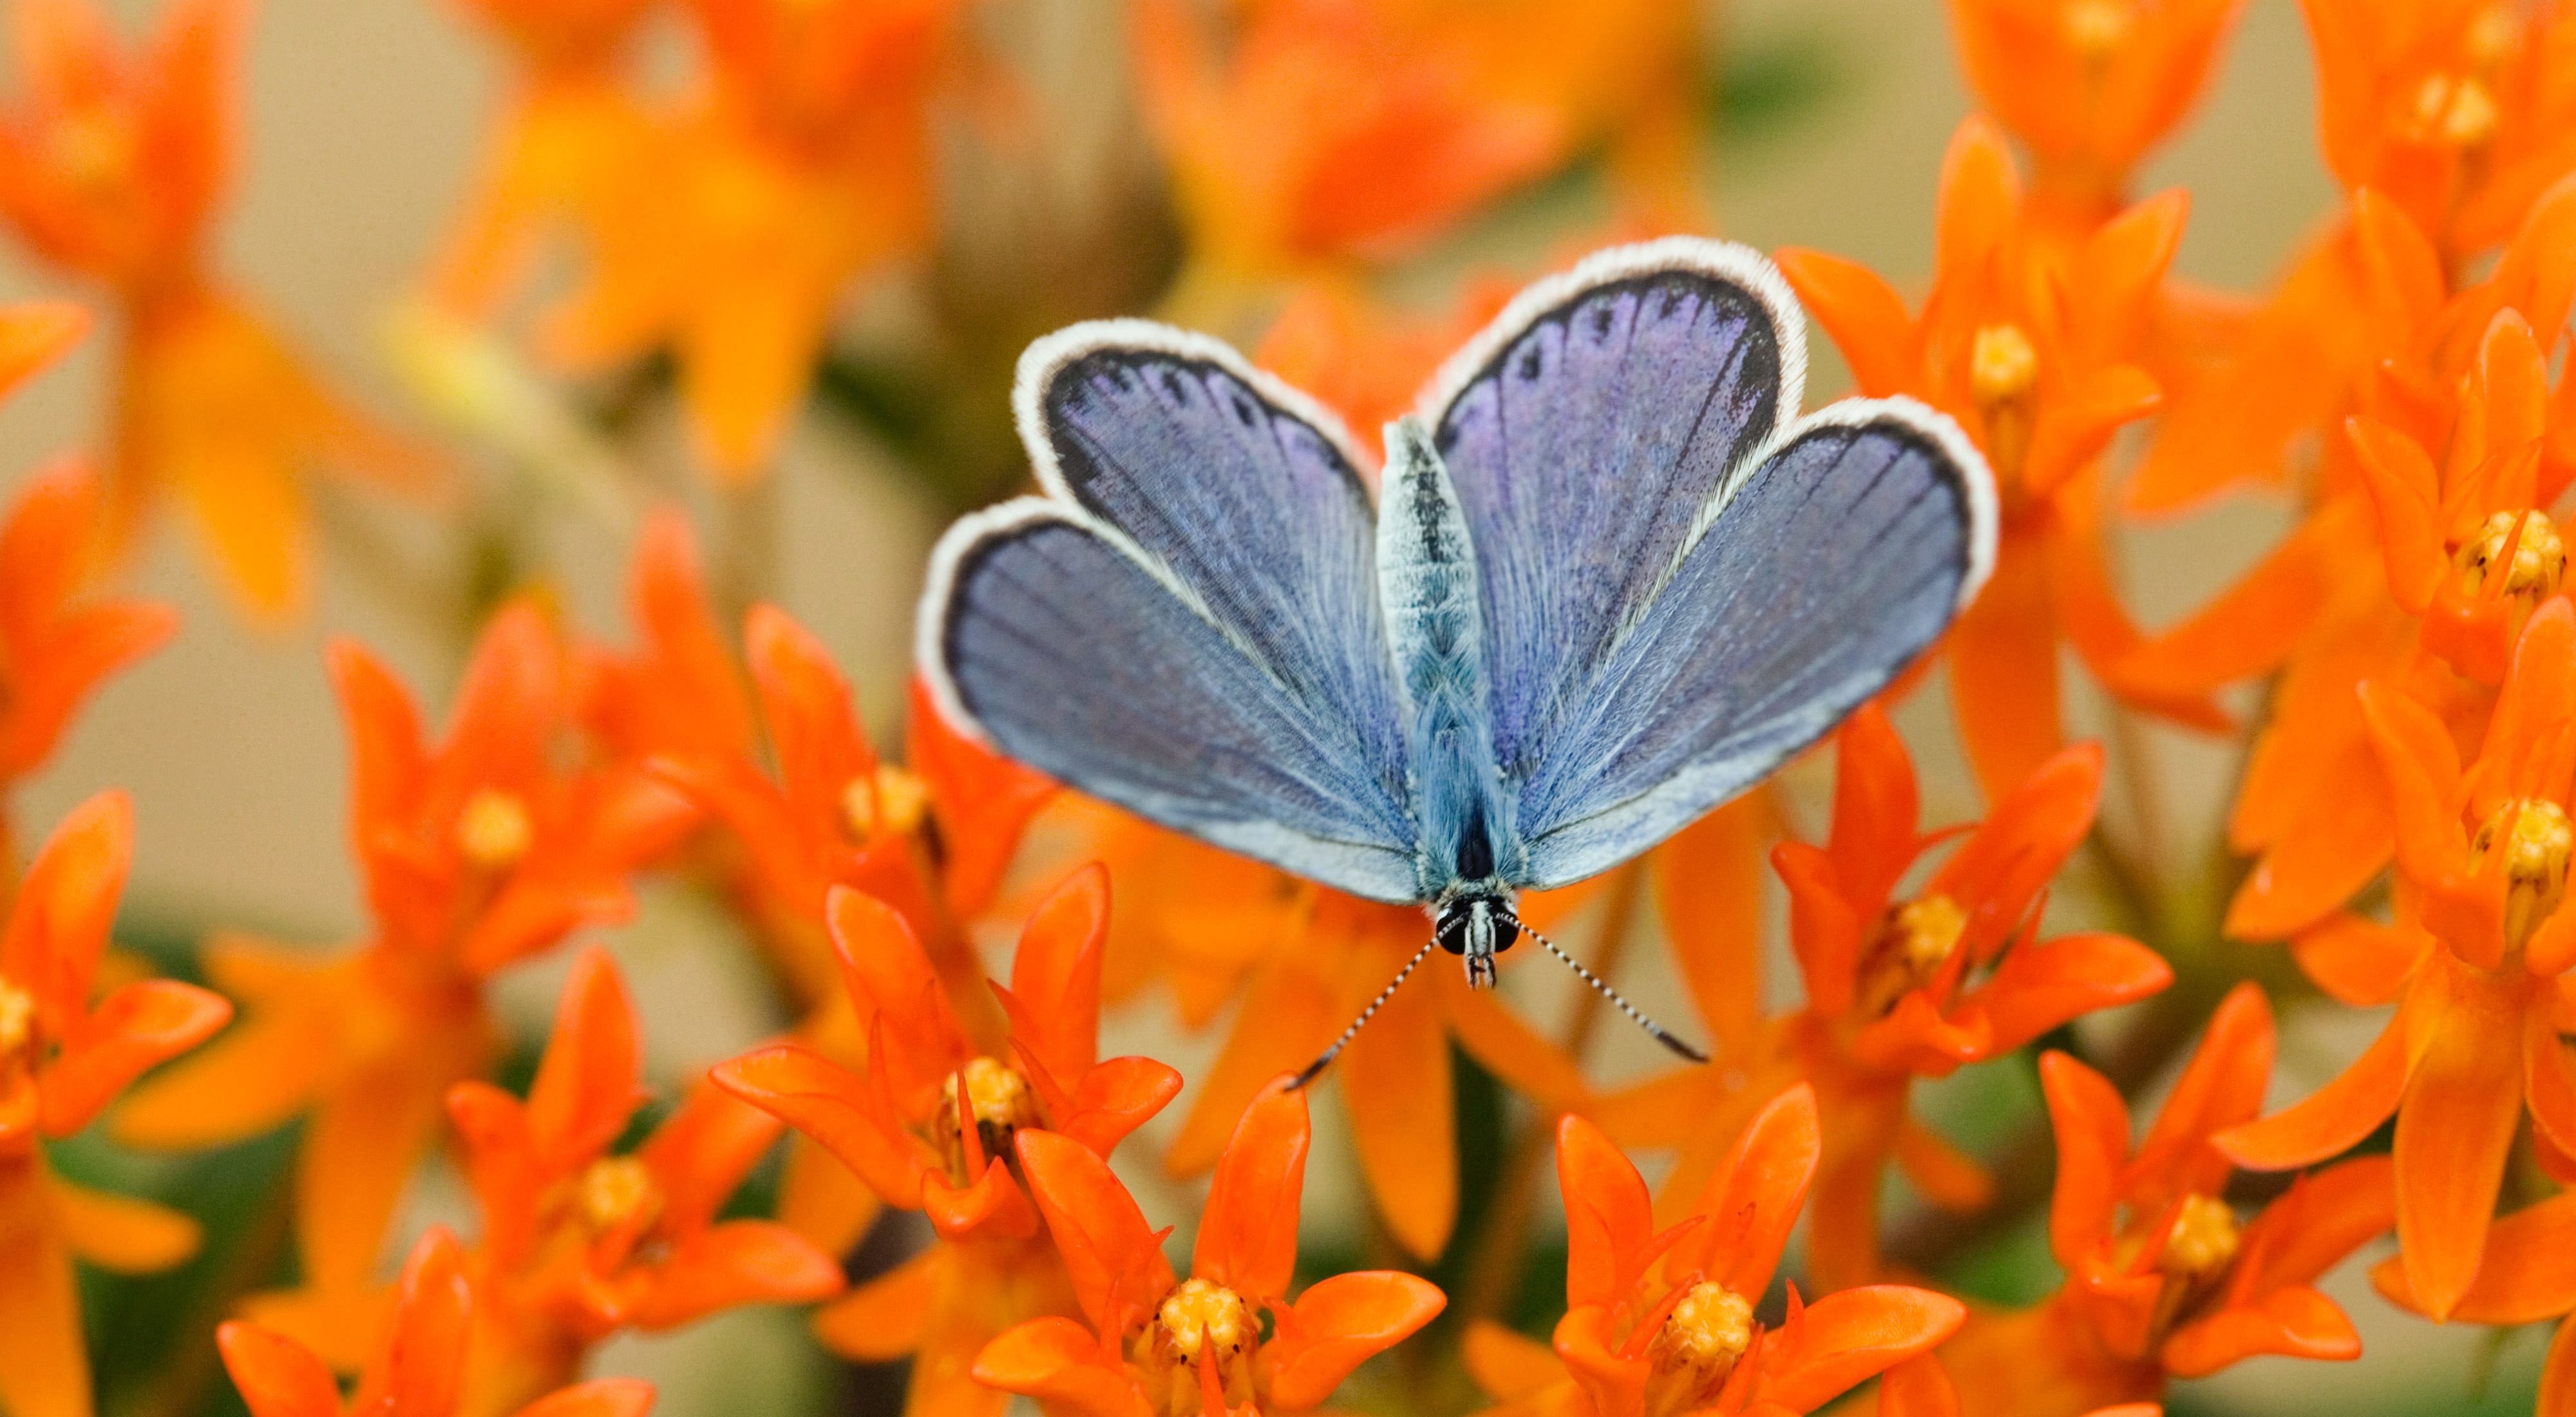 a blue butterfly stops upon a bright orange flower.